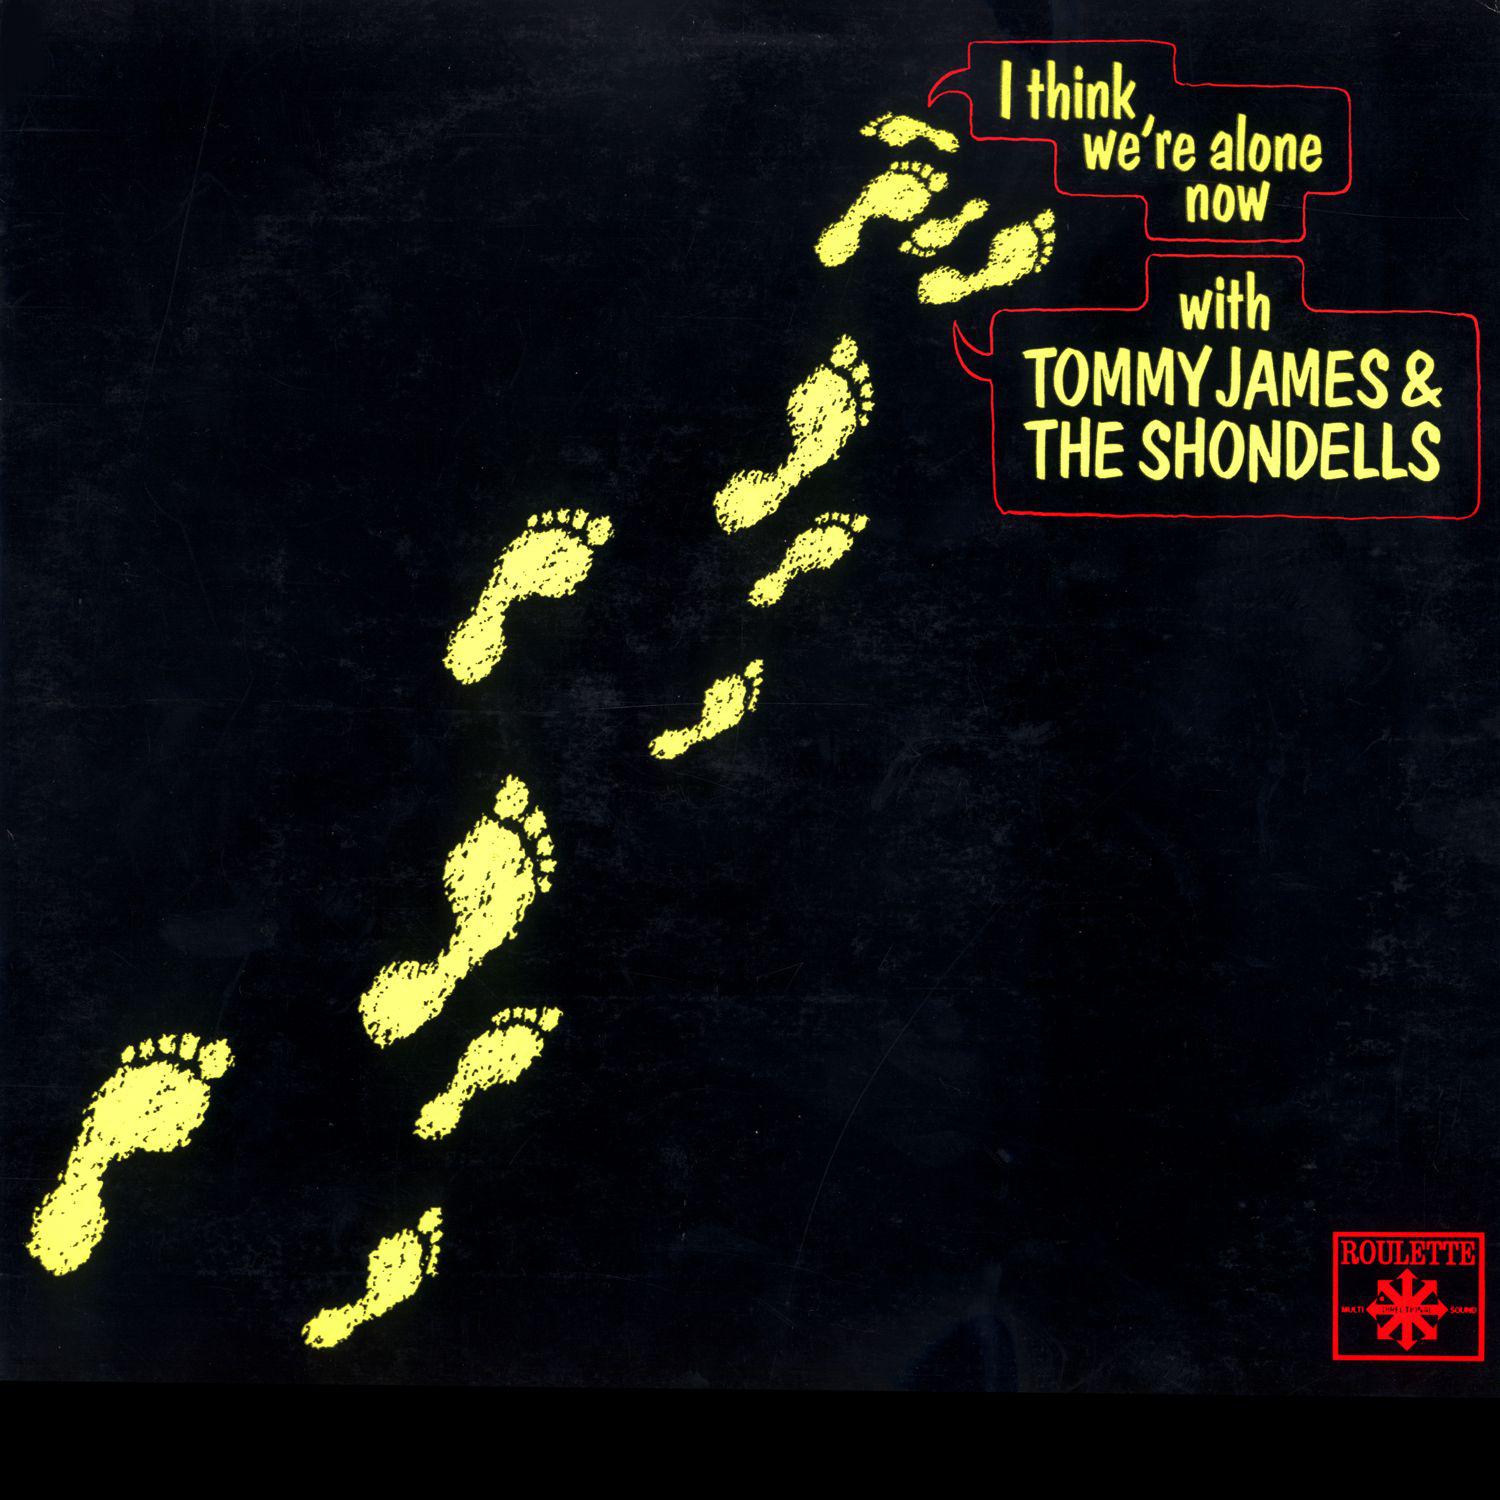 Tommy James & the Shondells - What I'd Give to See Your Face Again